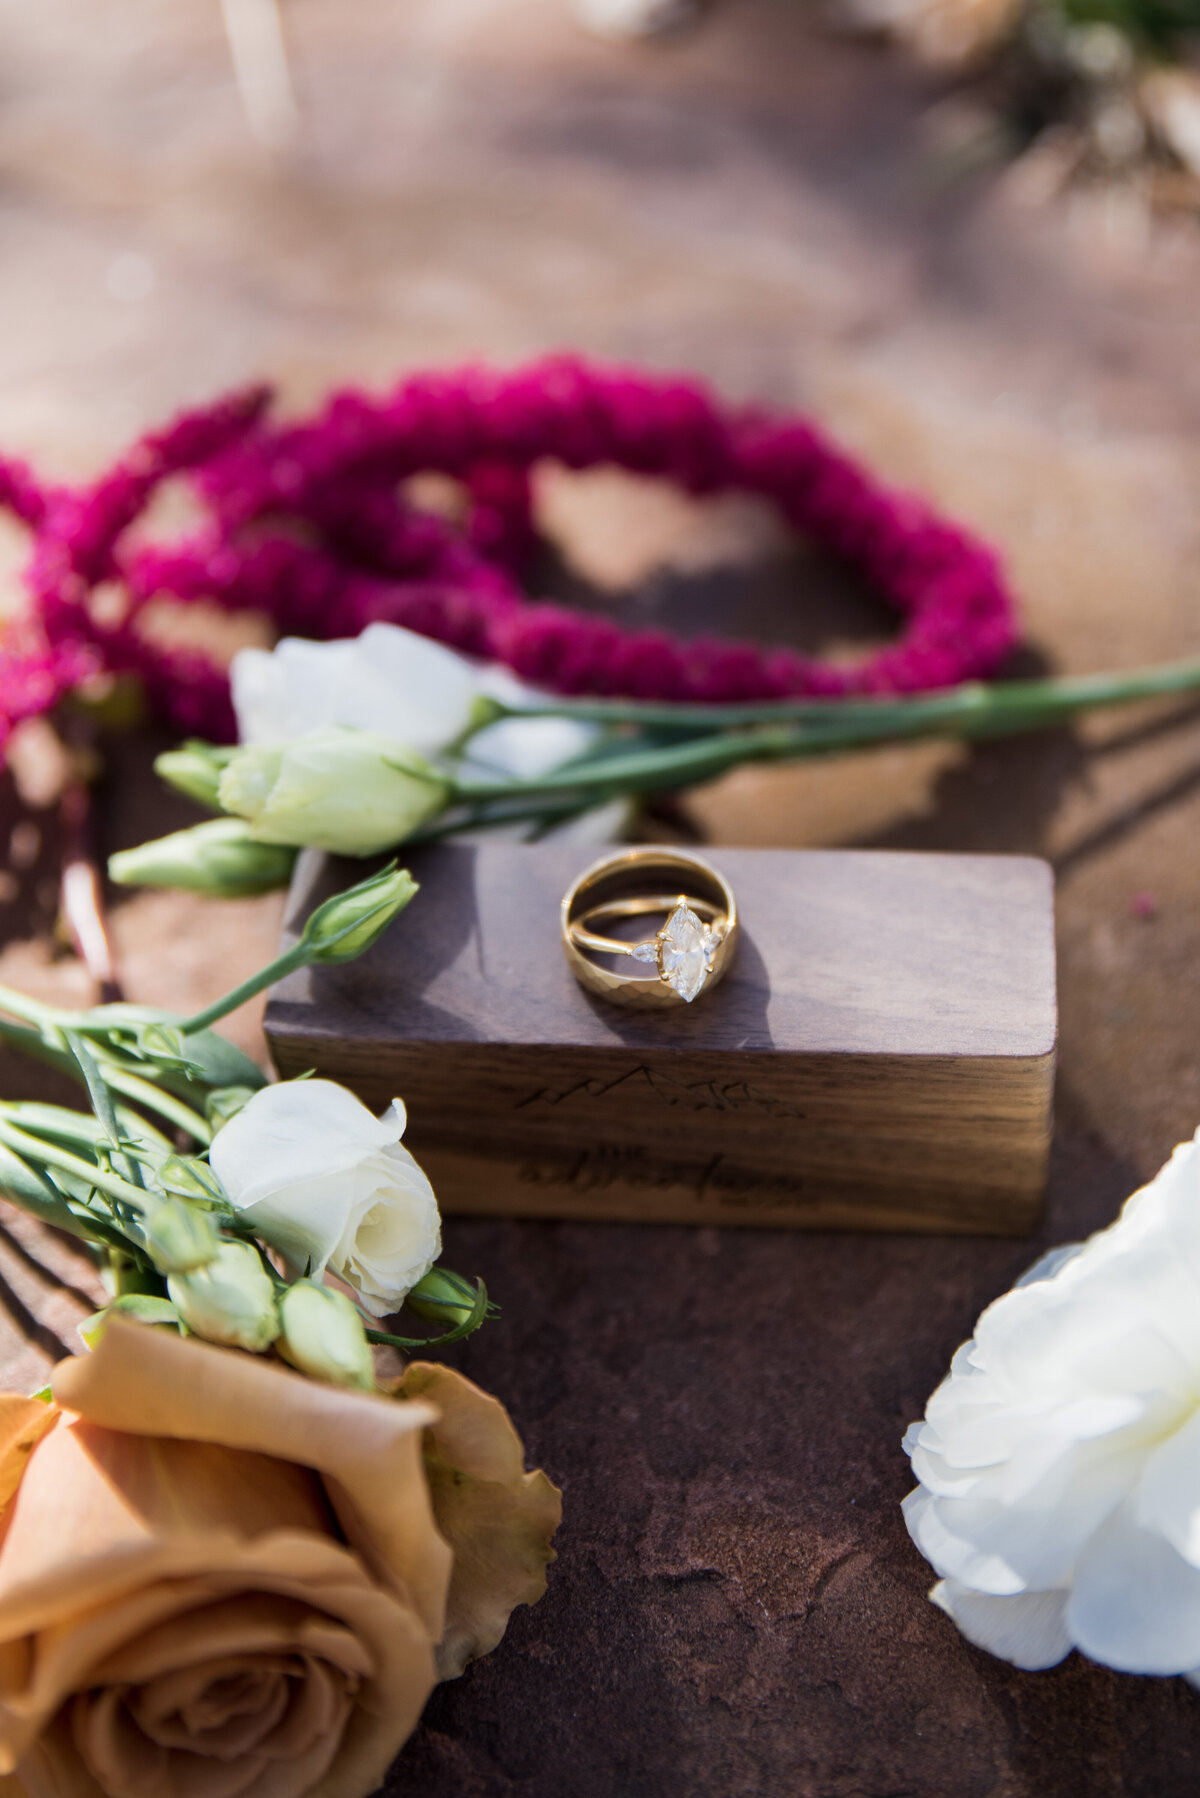 A diamond engagement ring and men's wedding band sit on a wooden box with an orange rose in the foreground.